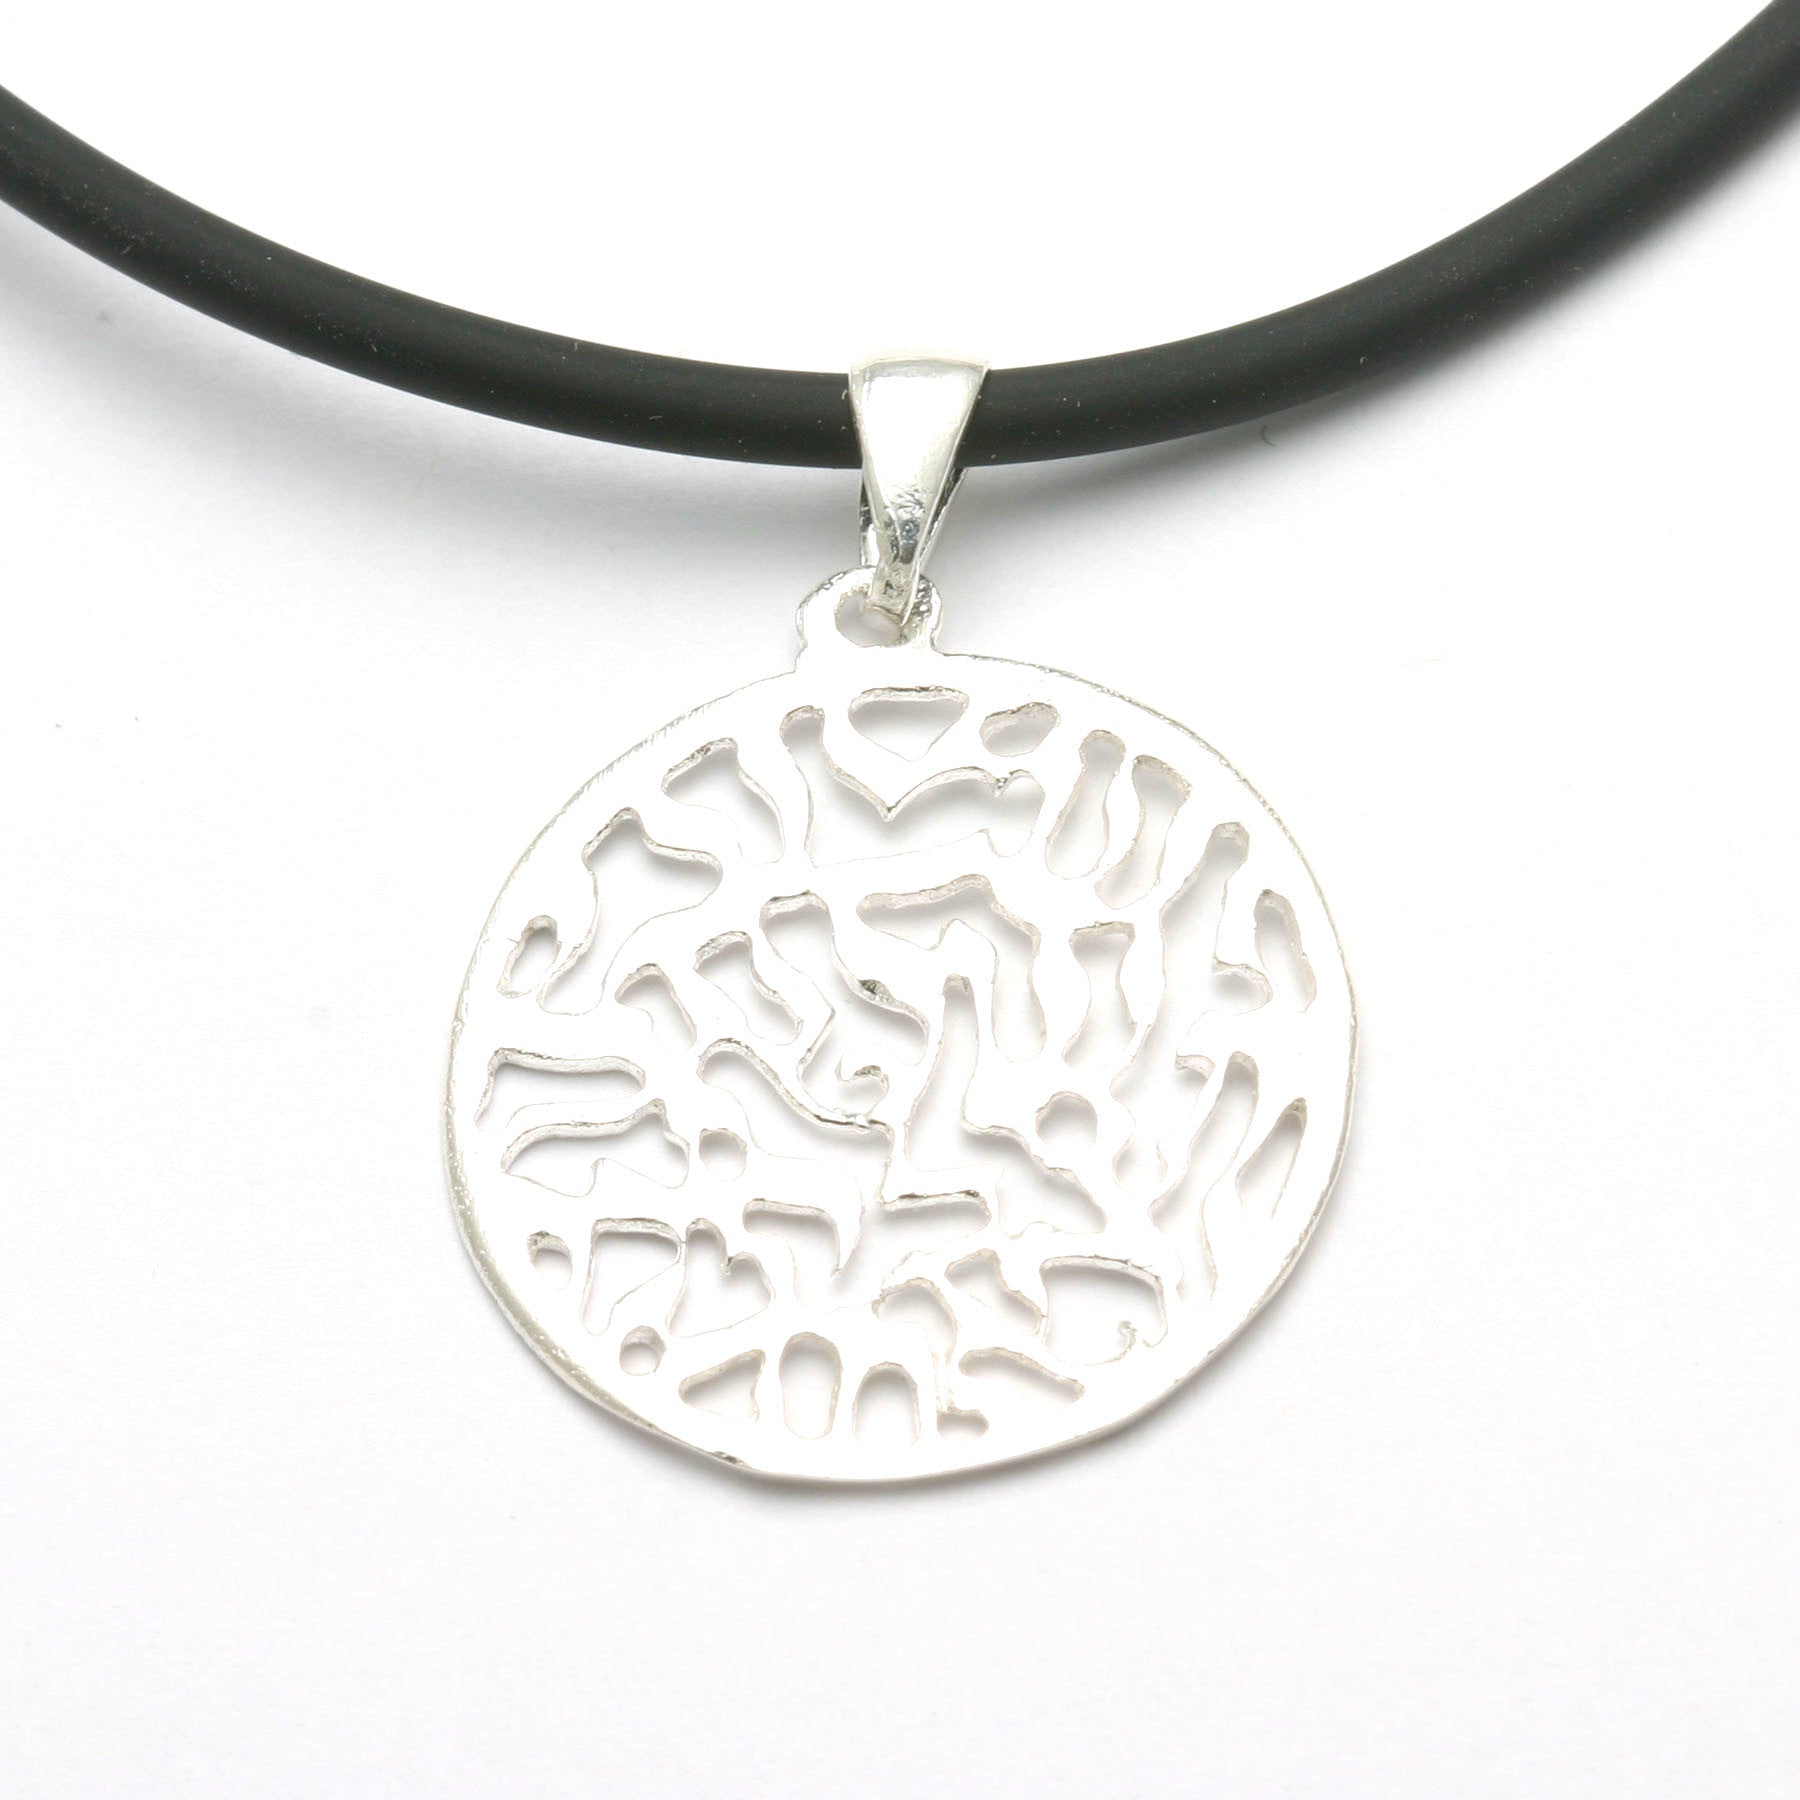 Sterling Silver Shema Israel Pendant Judaica Encircled Necklace - JewelryJudaica